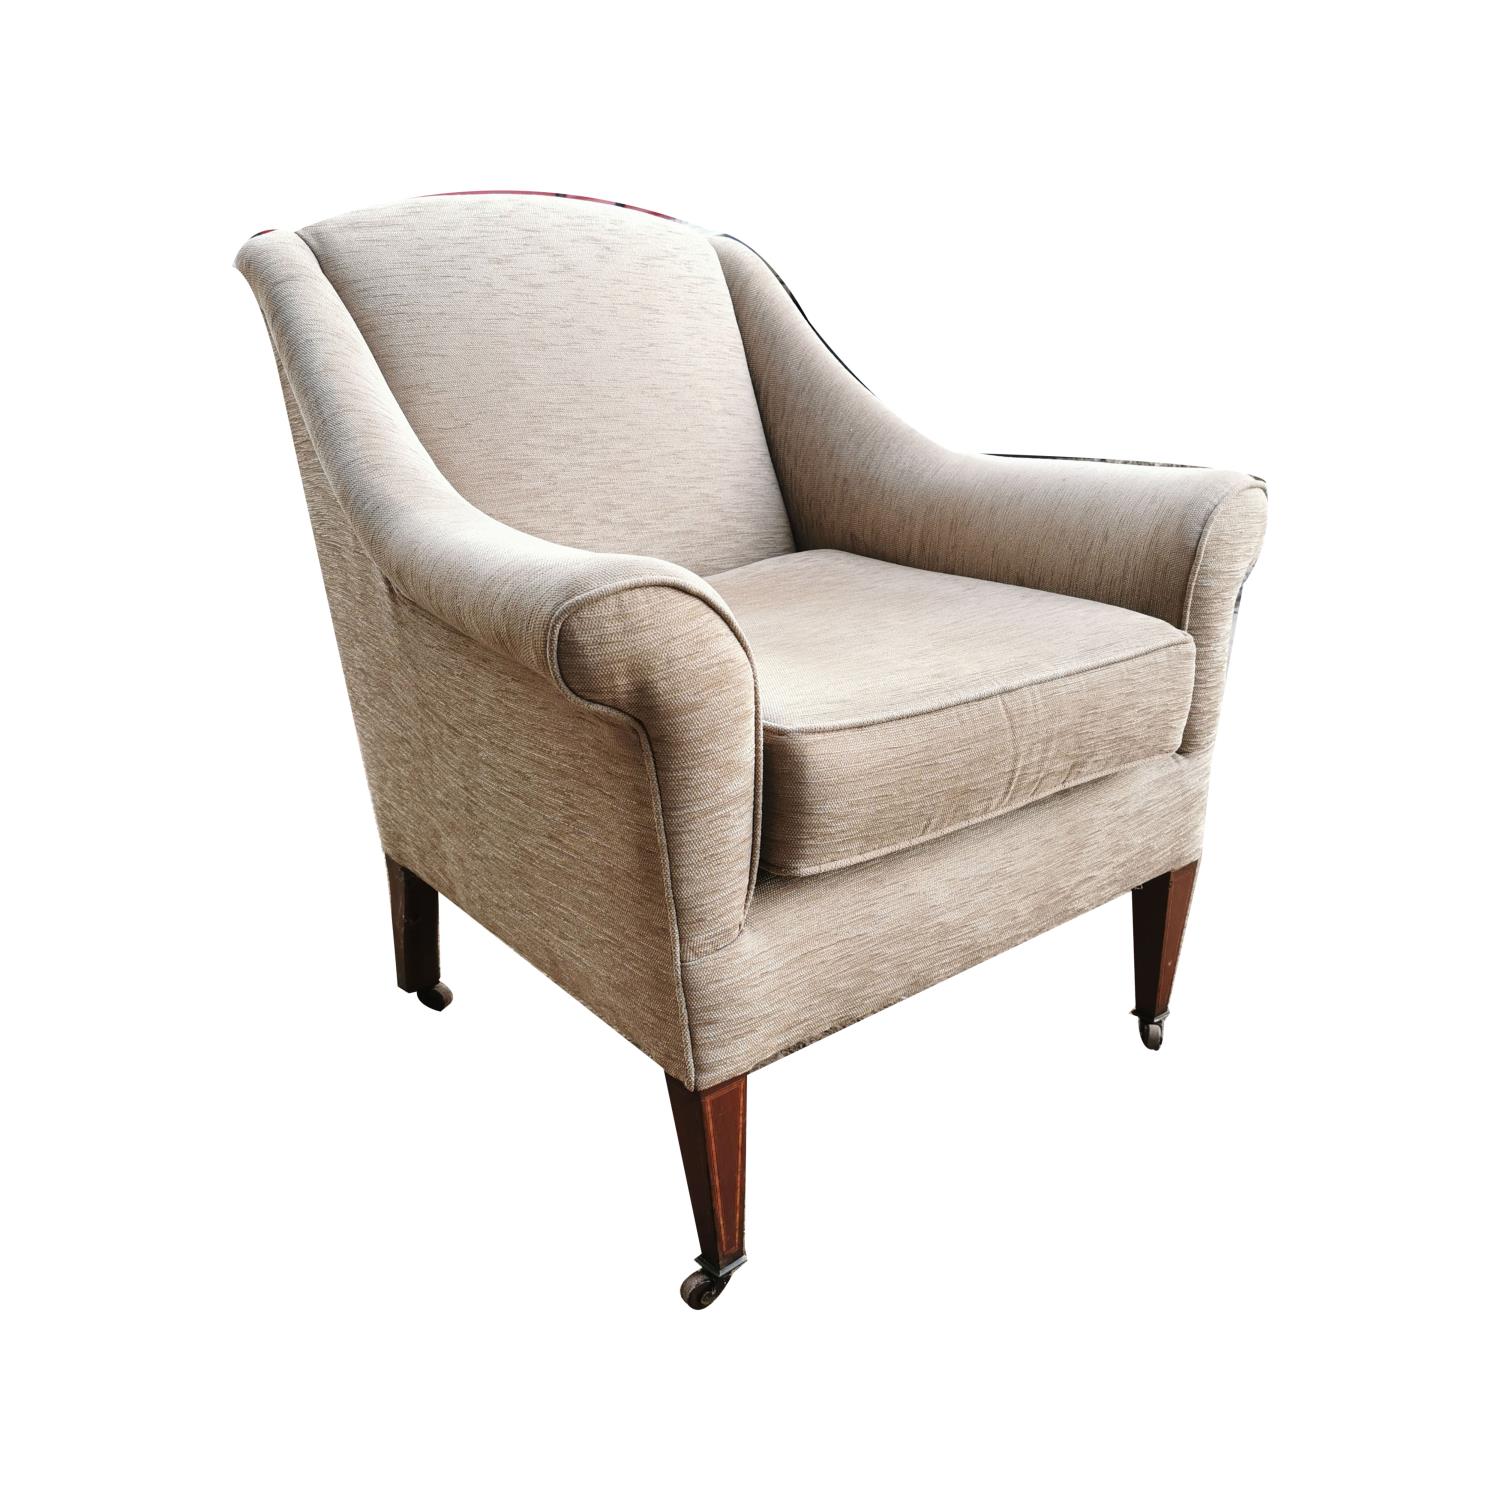 Edwardian upholstered inlaid mahogany armchair raised on tapered square legs with brass casters {